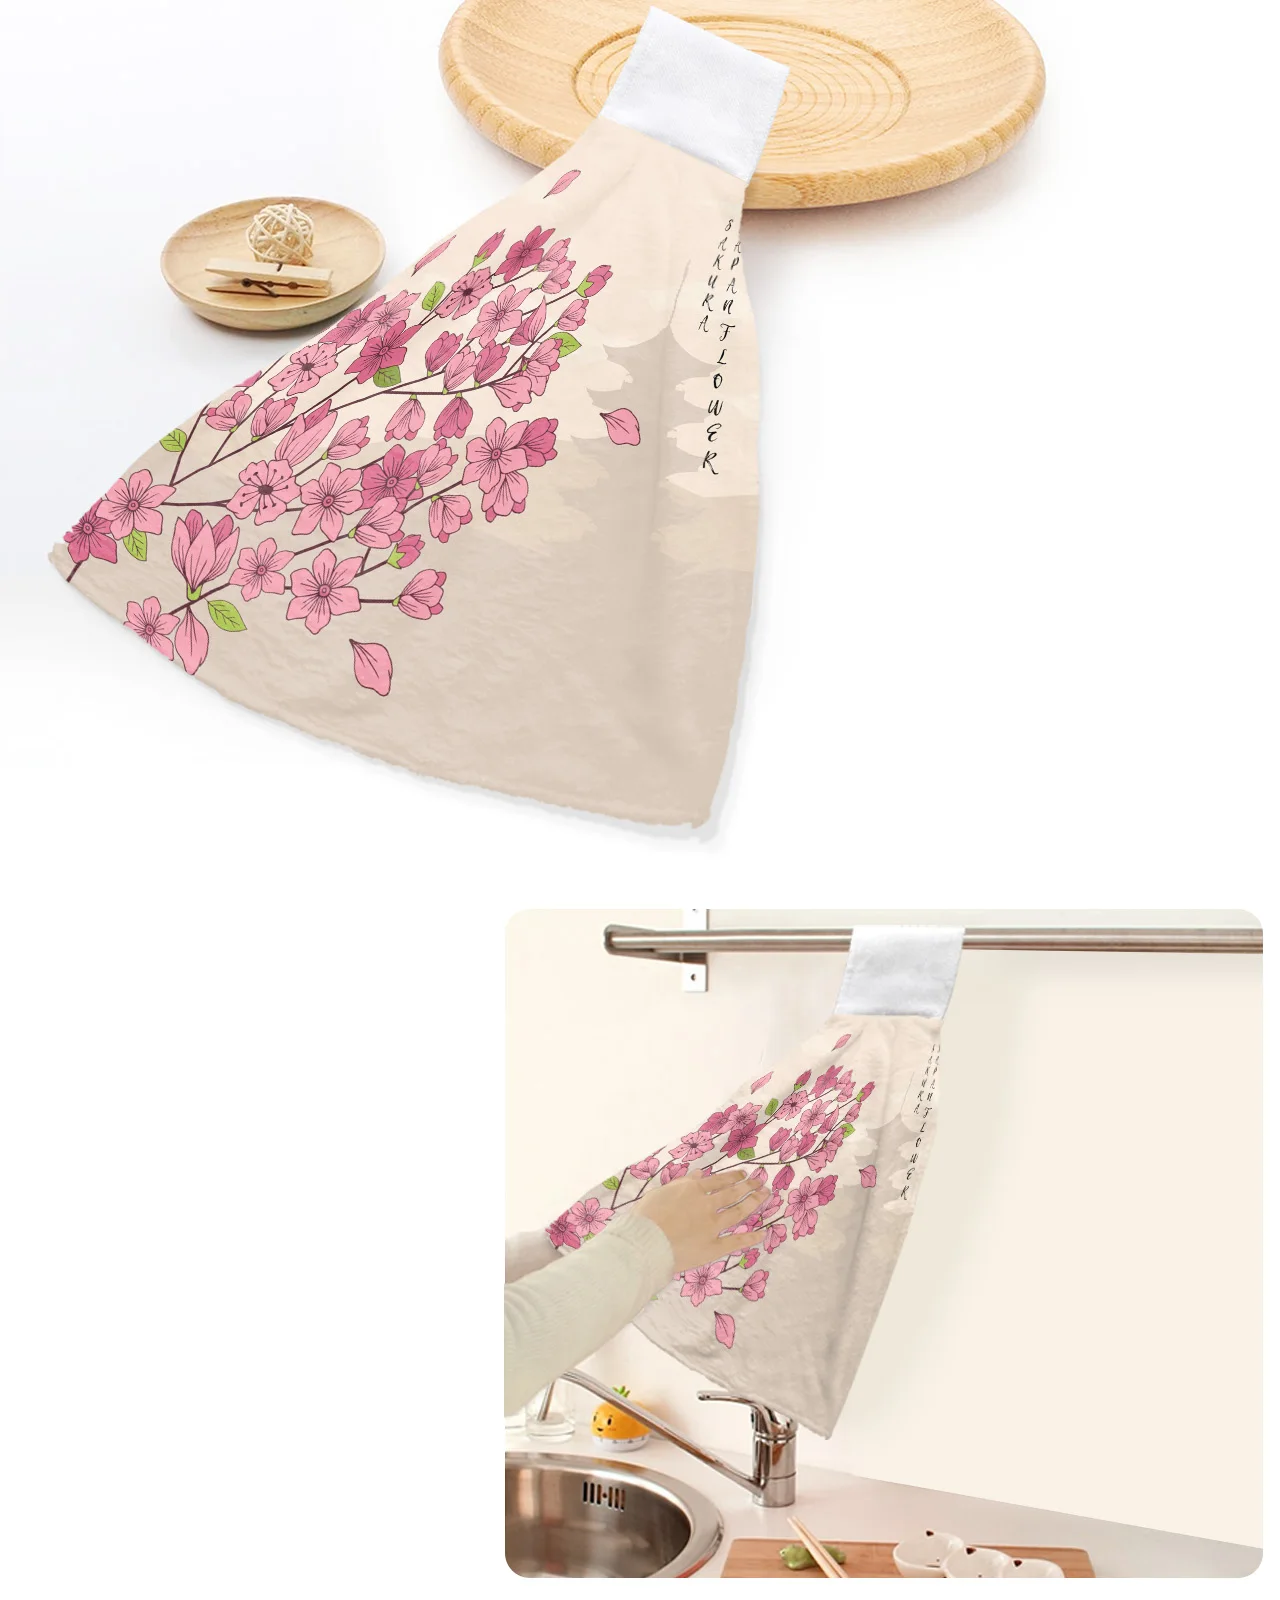 

Cherry Blossom Flower Tower Japanese Hand Towels Home Kitchen Bathroom Hanging Dishcloths Loops Soft Absorbent Custom Wipe Towel